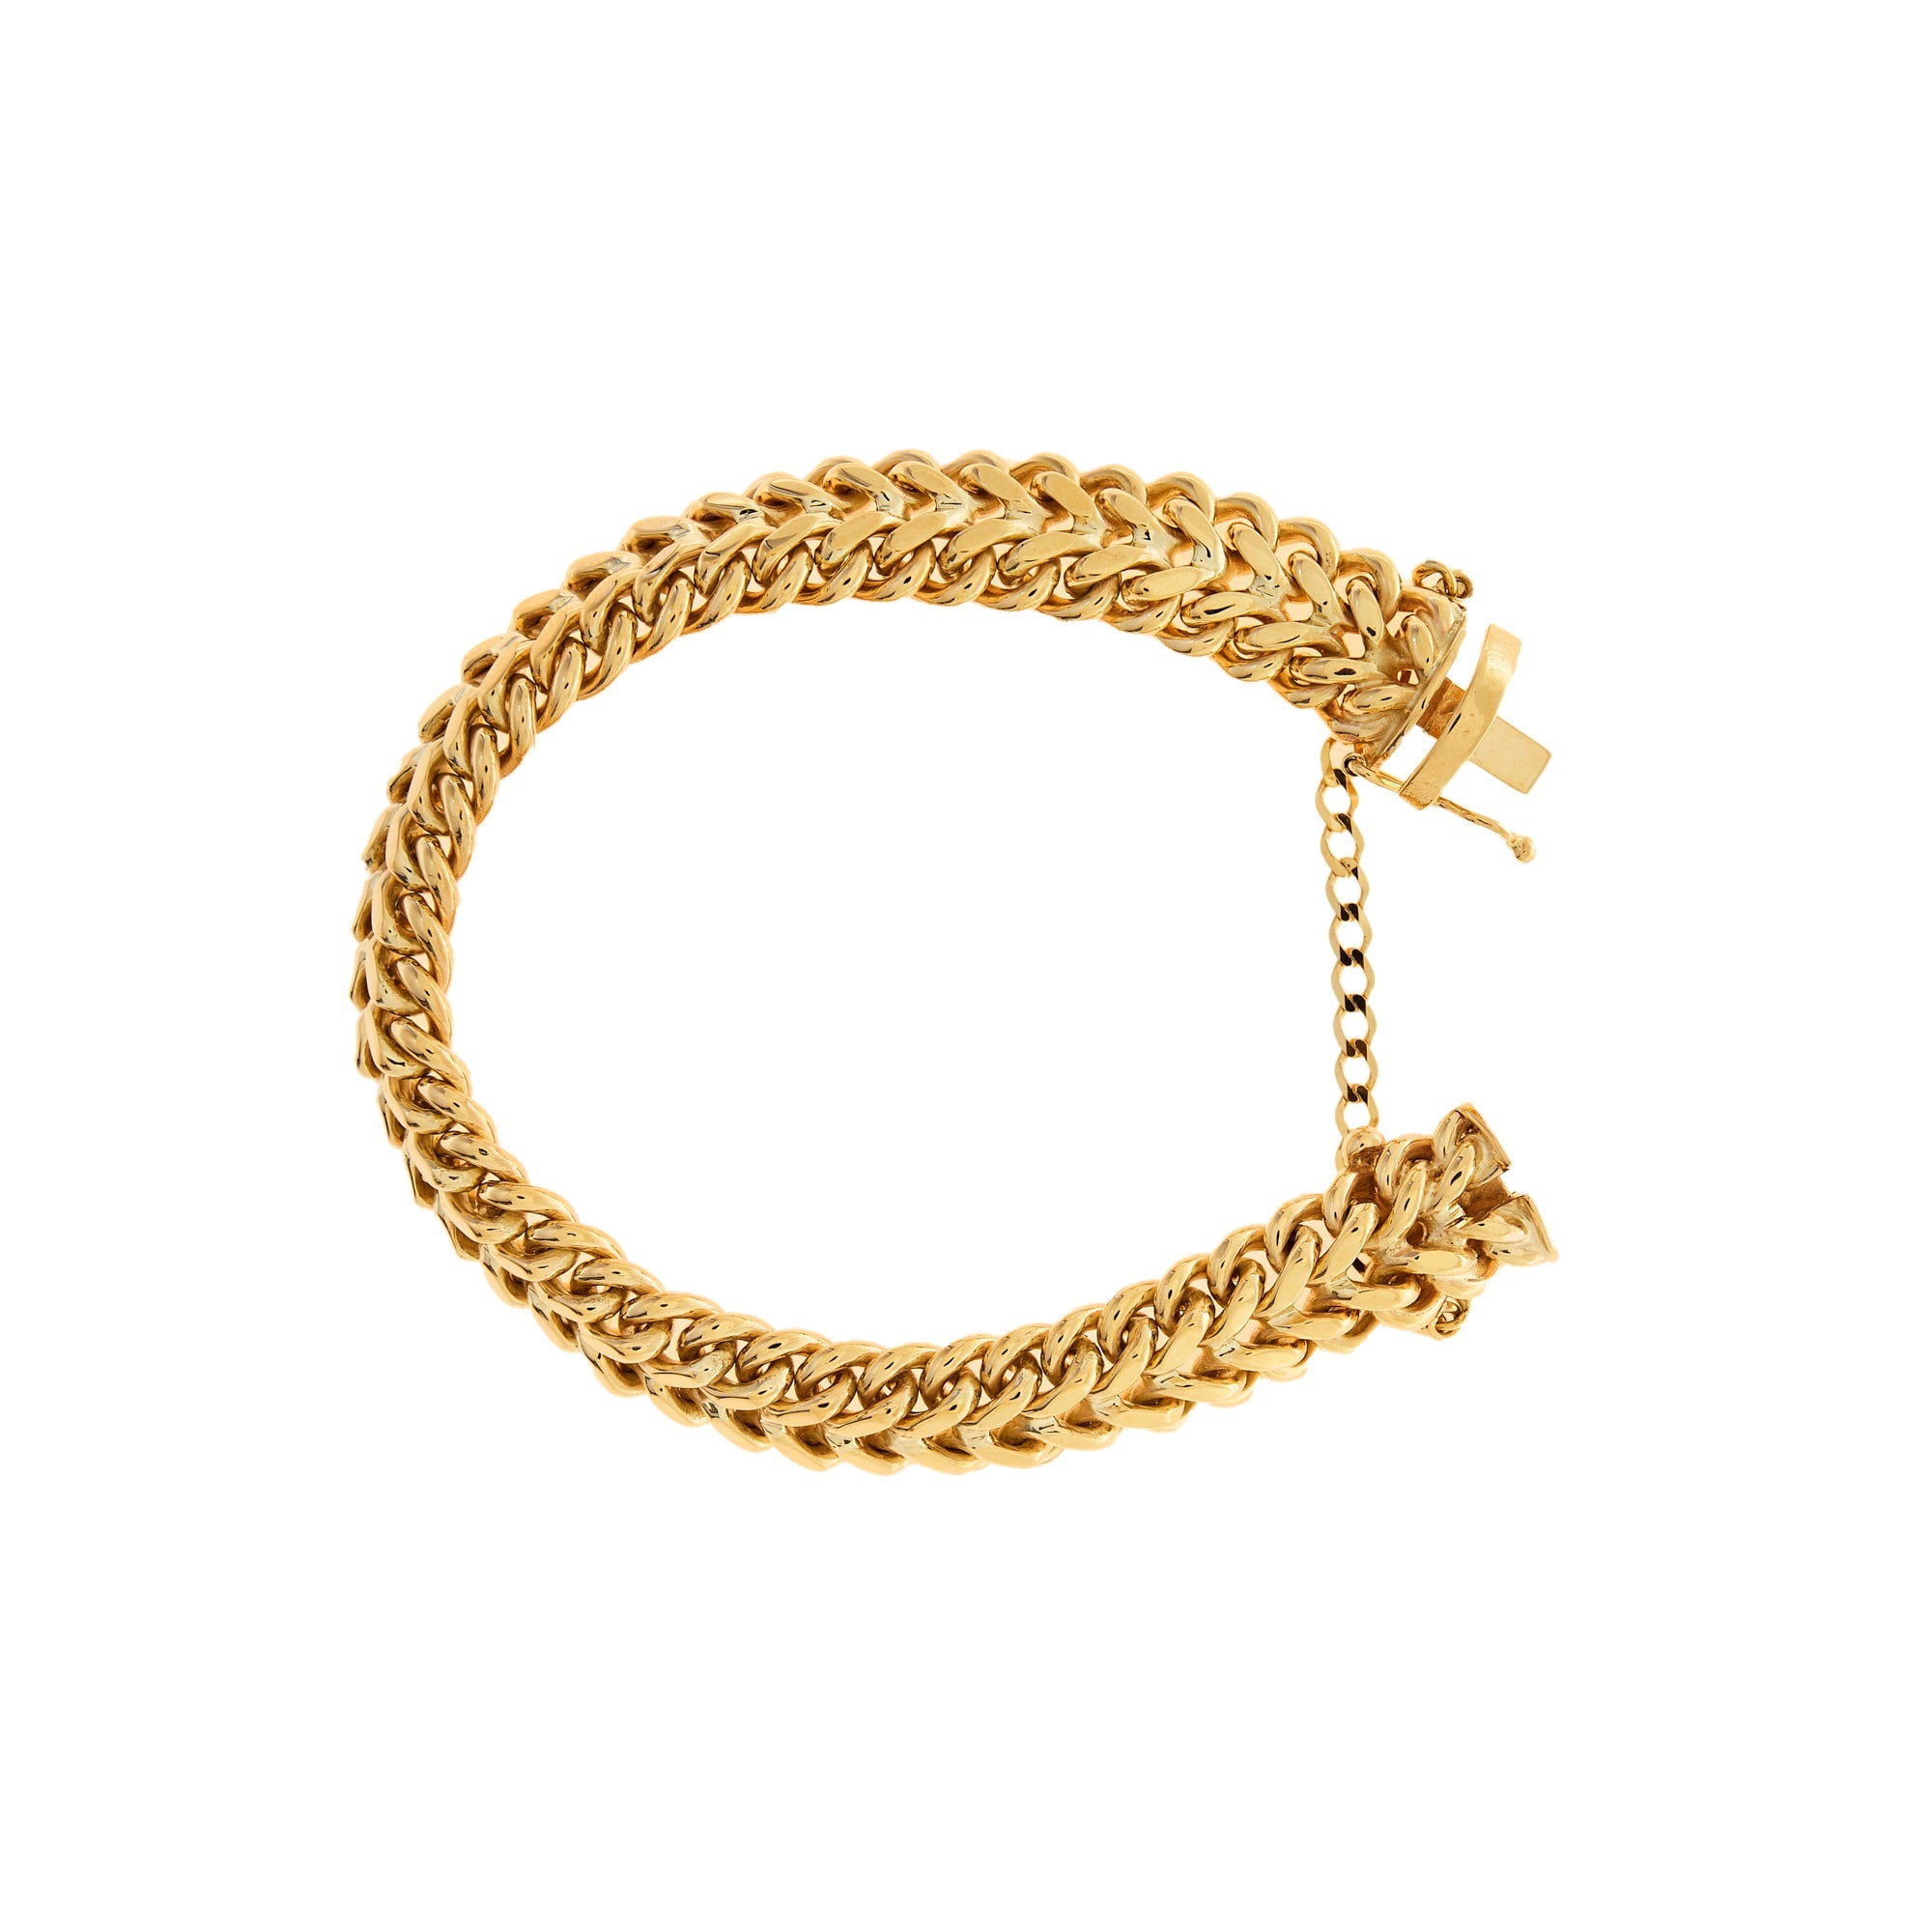 9ct Gold 5mm Wide Curb Bracelet - 7.5in - G7220 | F.Hinds Jewellers